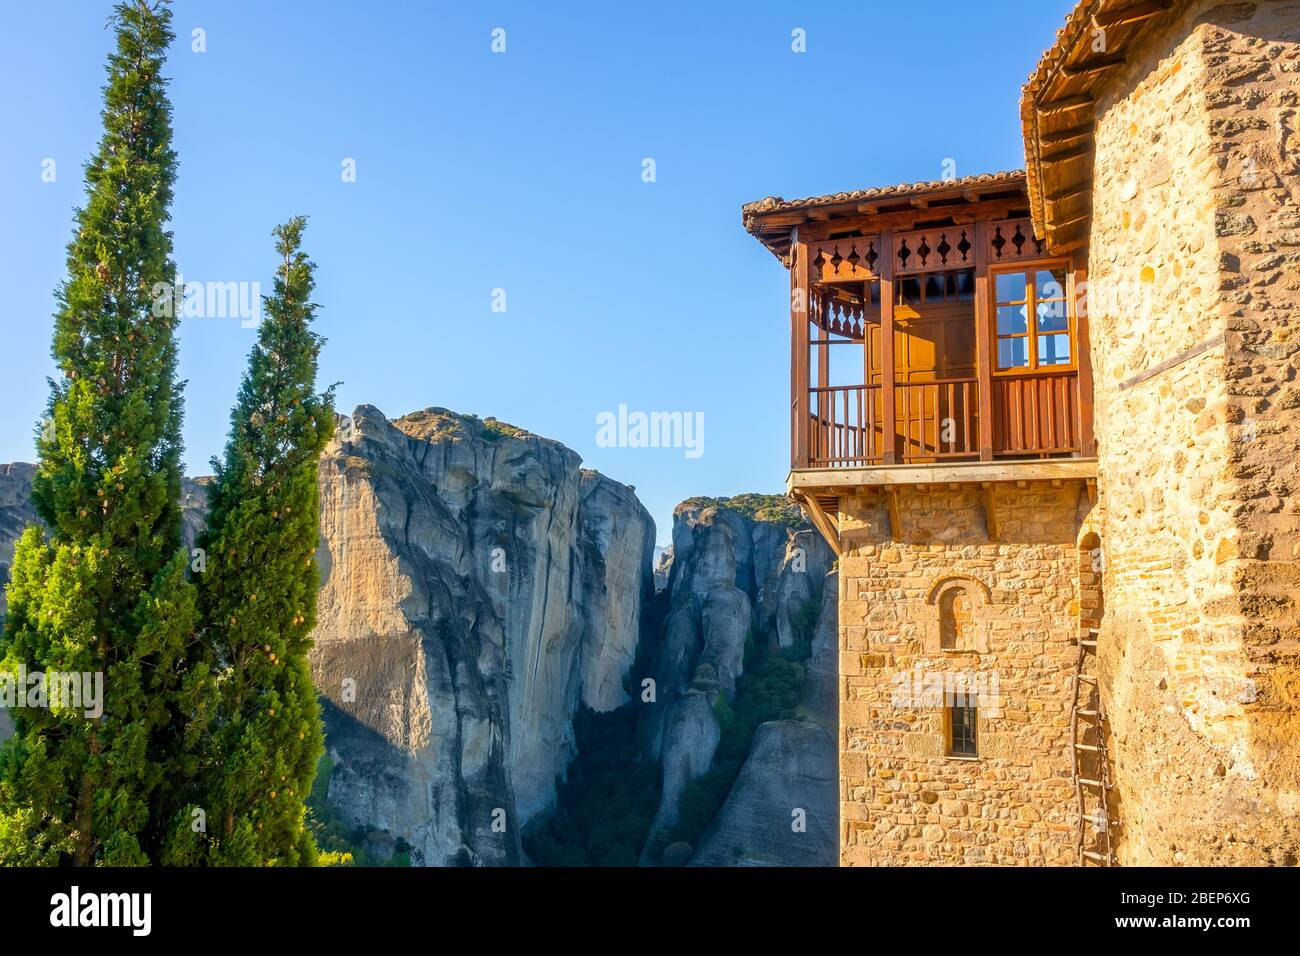 Greece. Summer sunny day in Meteora. Fragment of a monastery building with a balcony and a rope ladder Stock Photo